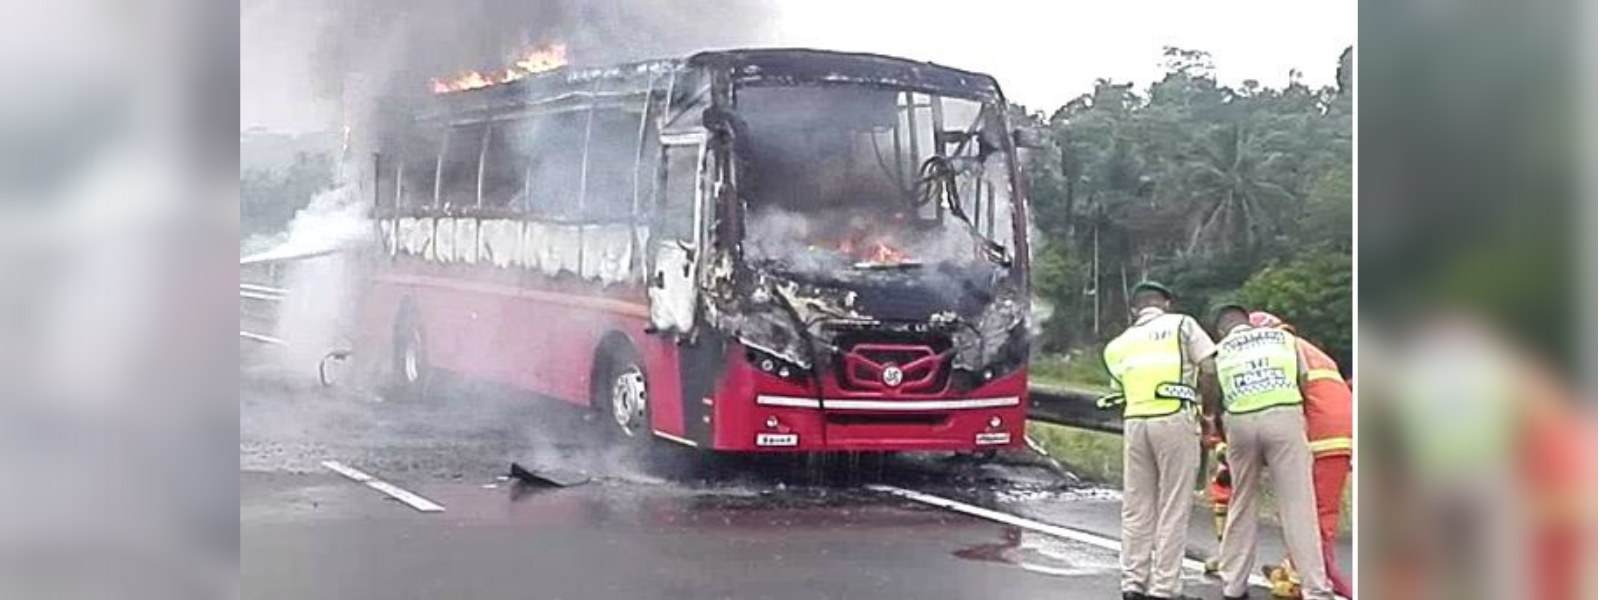 Bus traveling on Southern highway catches fire